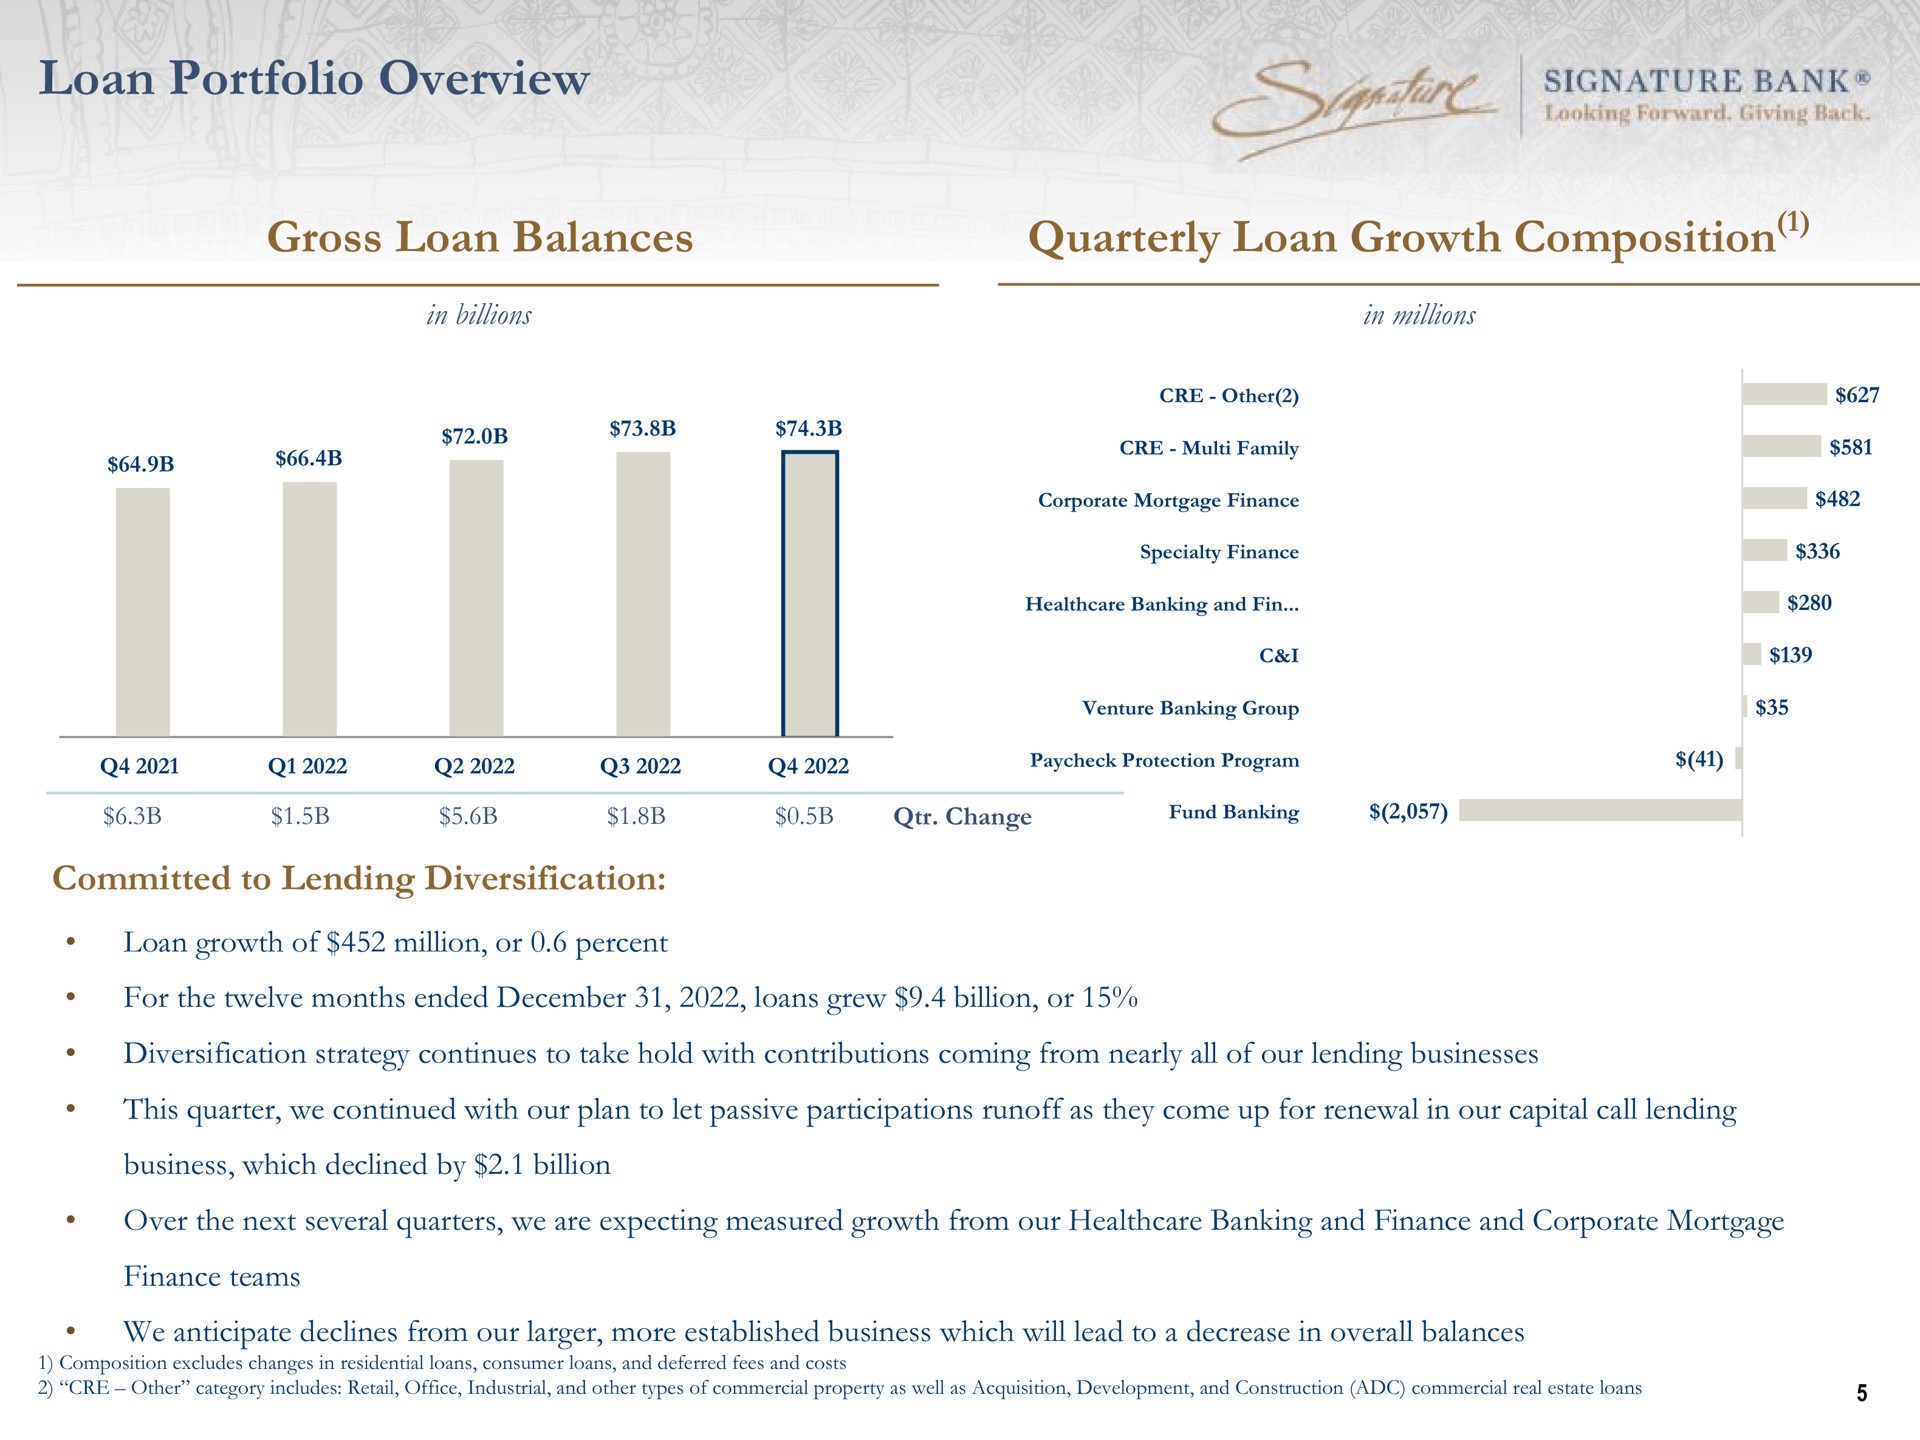 loan portfolio overview gross loan balances quarterly loan growth composition a signature bank change fund banking | Signature Bank